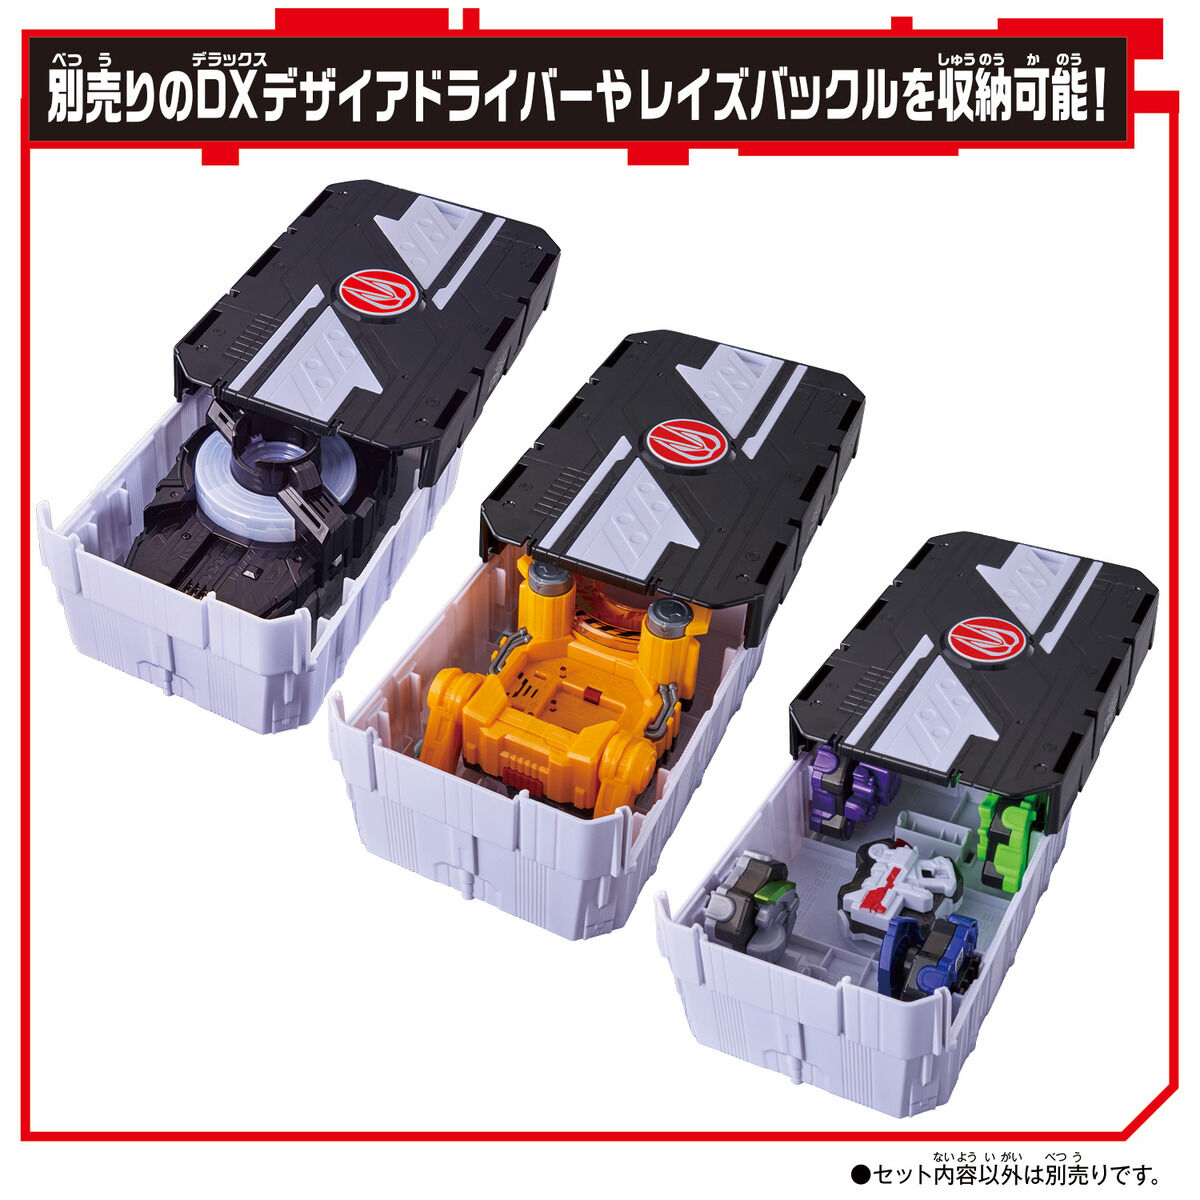 Support Mission Box Type Geats & Weapon Raise Buckle Set